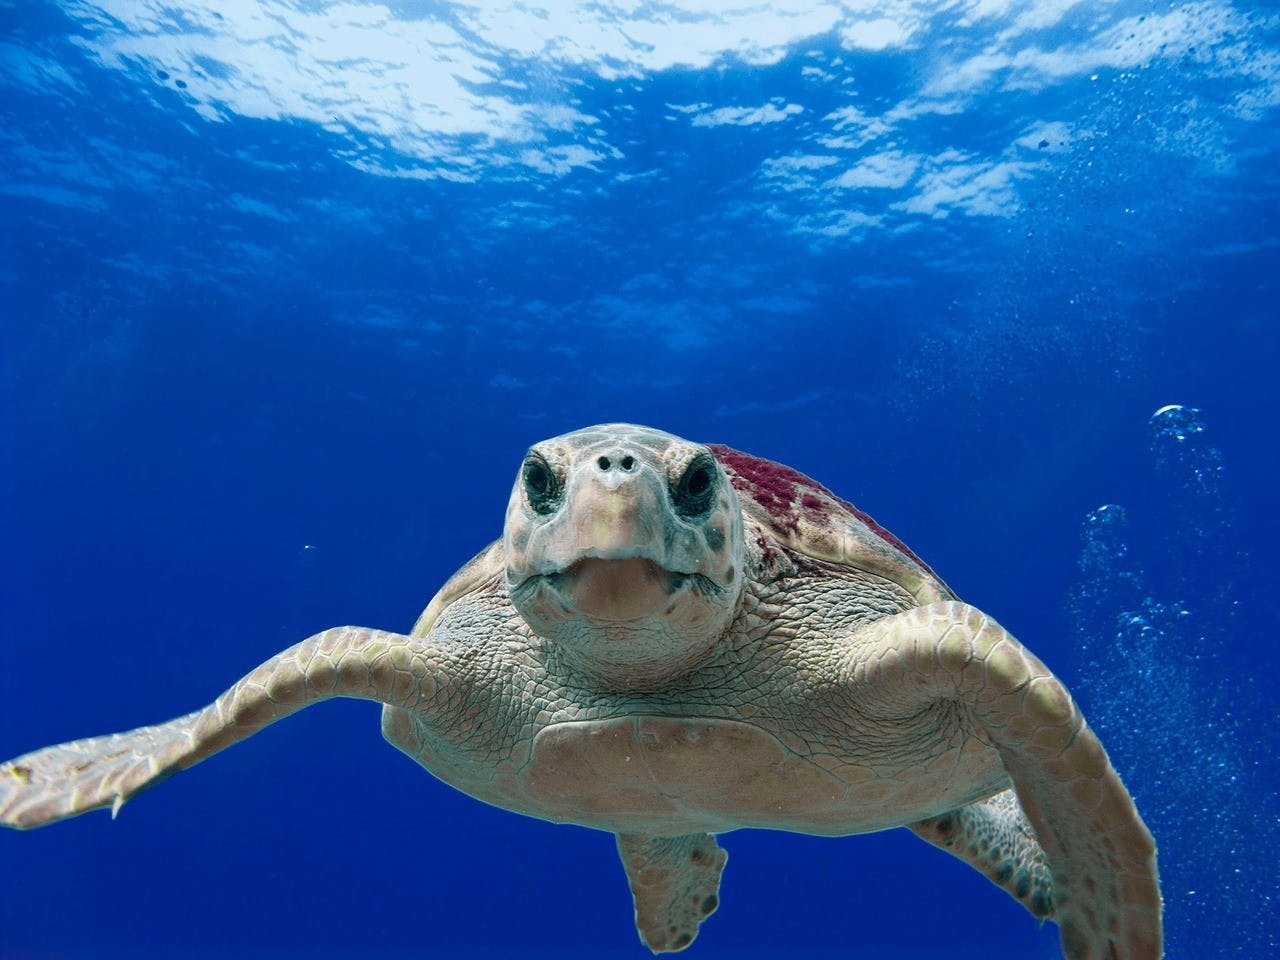 A sea turtle swimming in water, facing the camera.